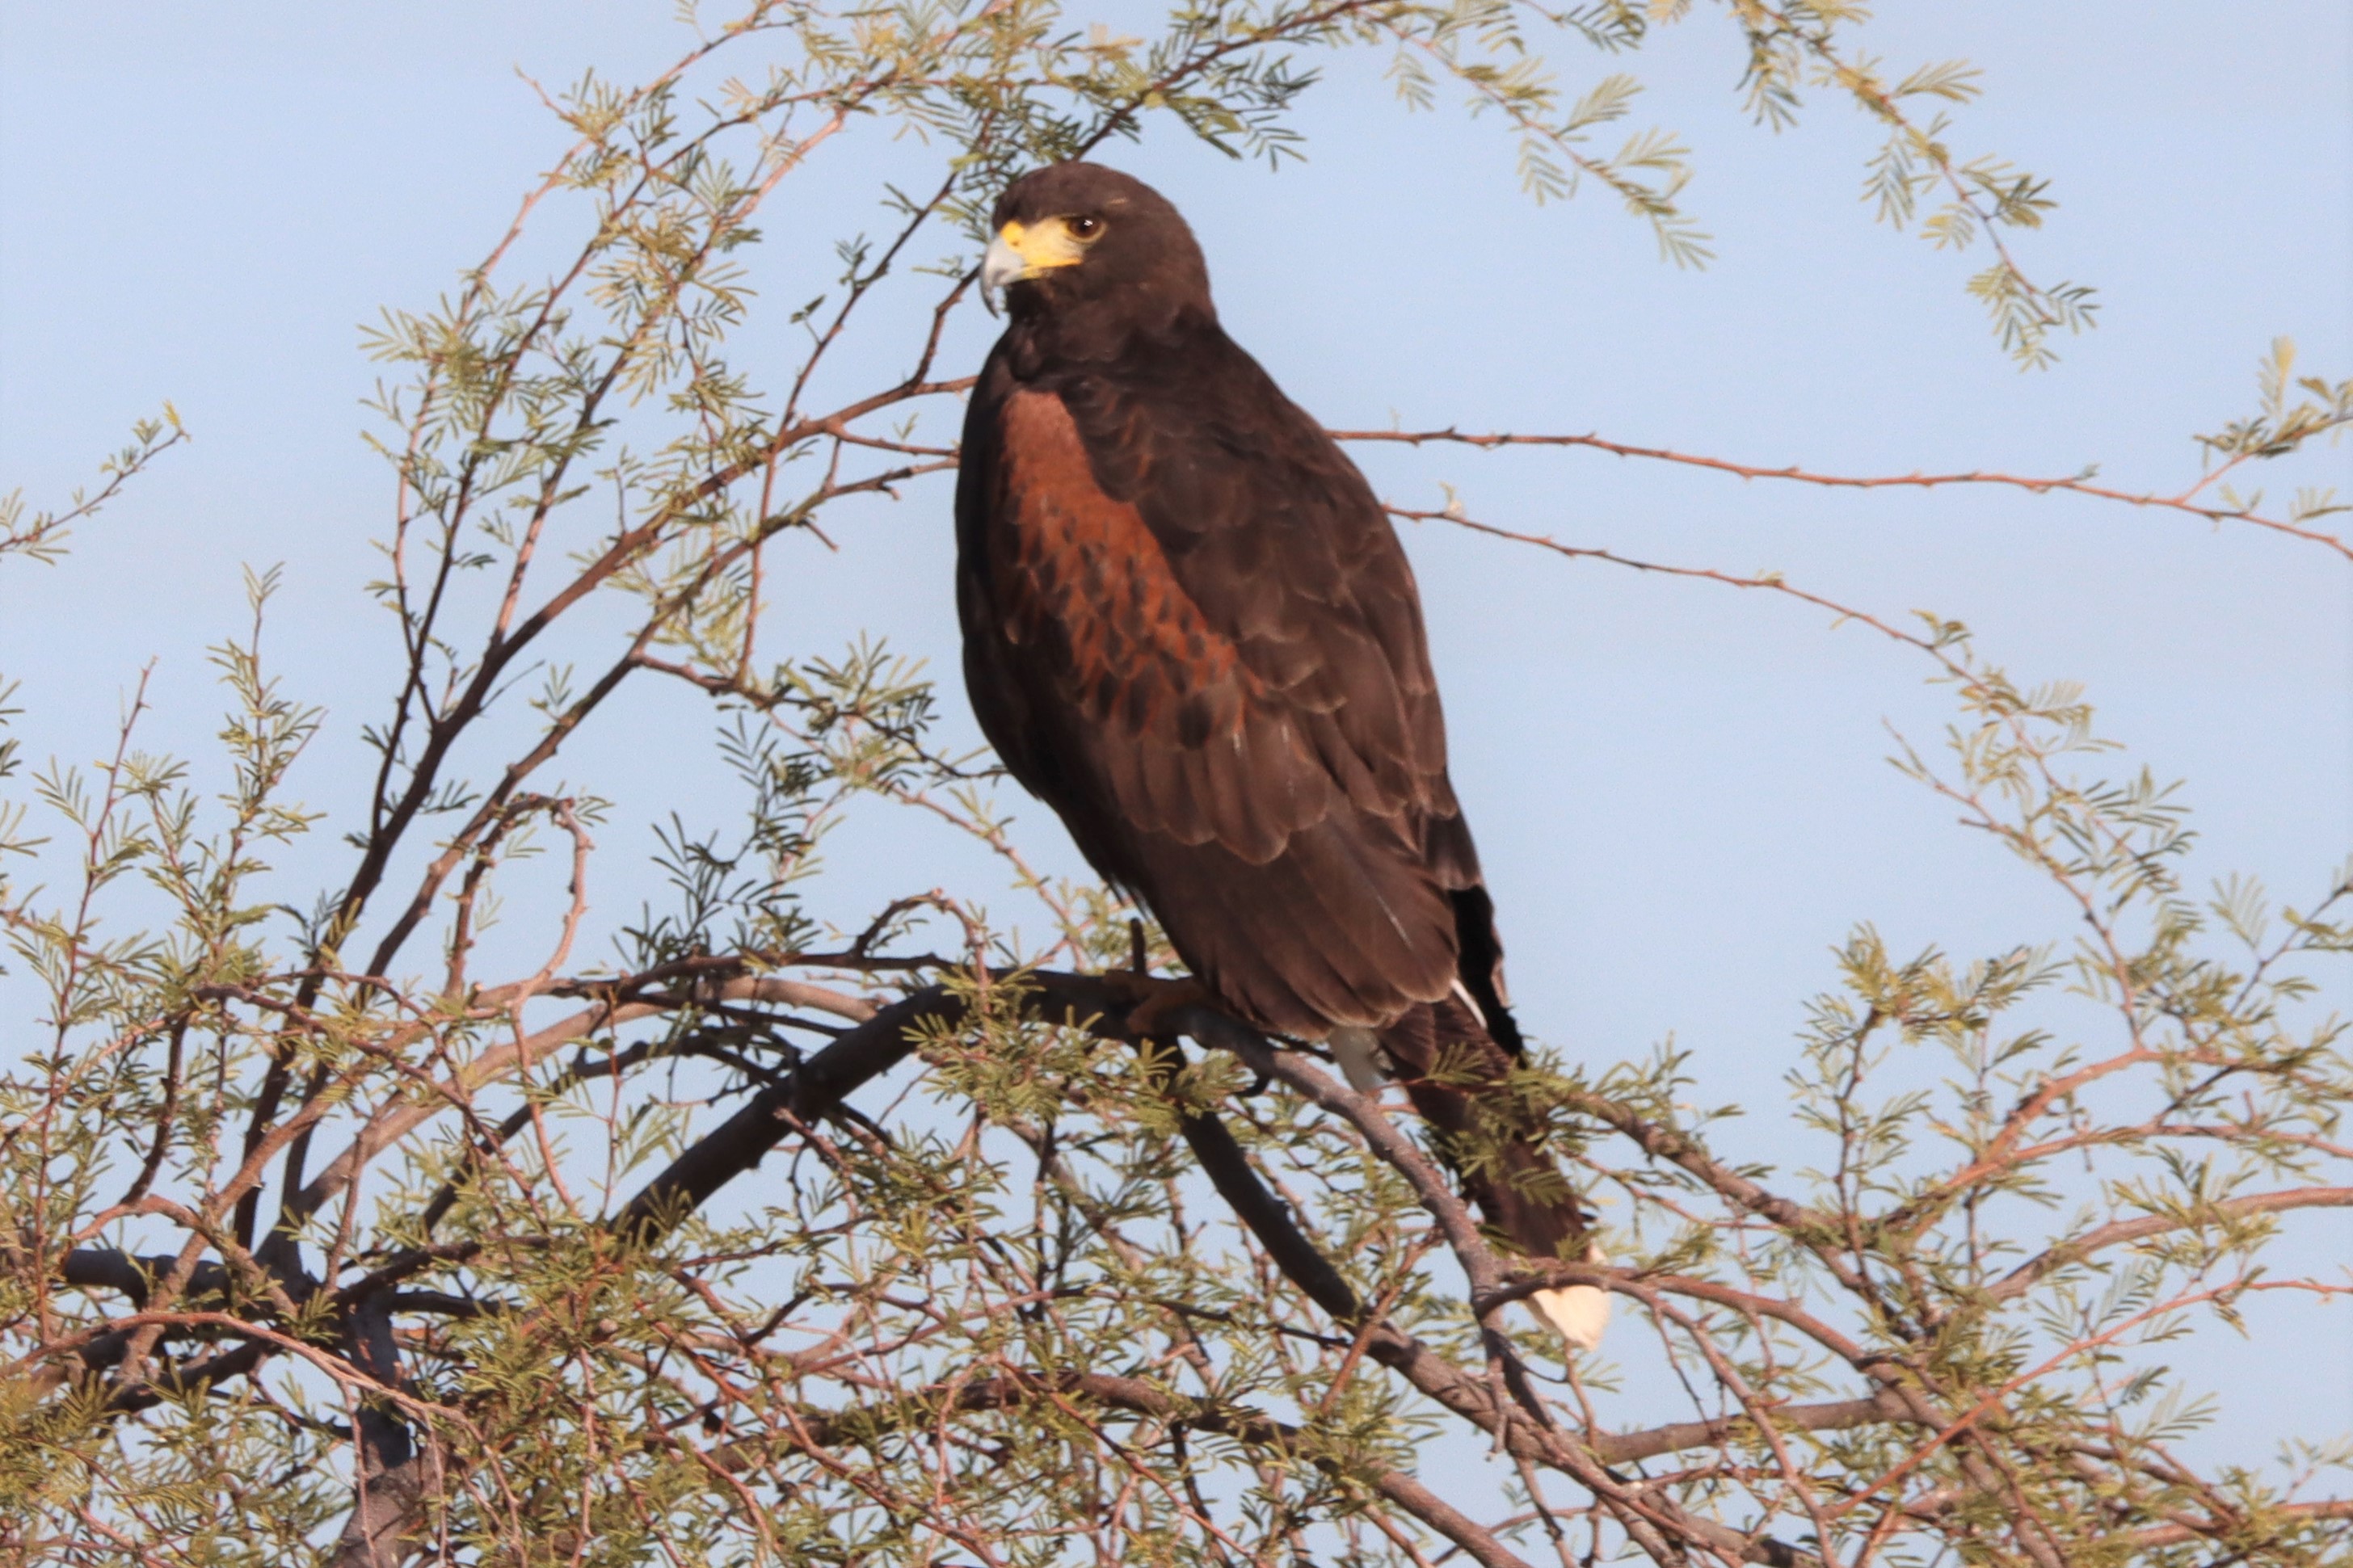 Photo by Buddy Walker  |  Harris's Hawk relaxing and  carefully looking over territory